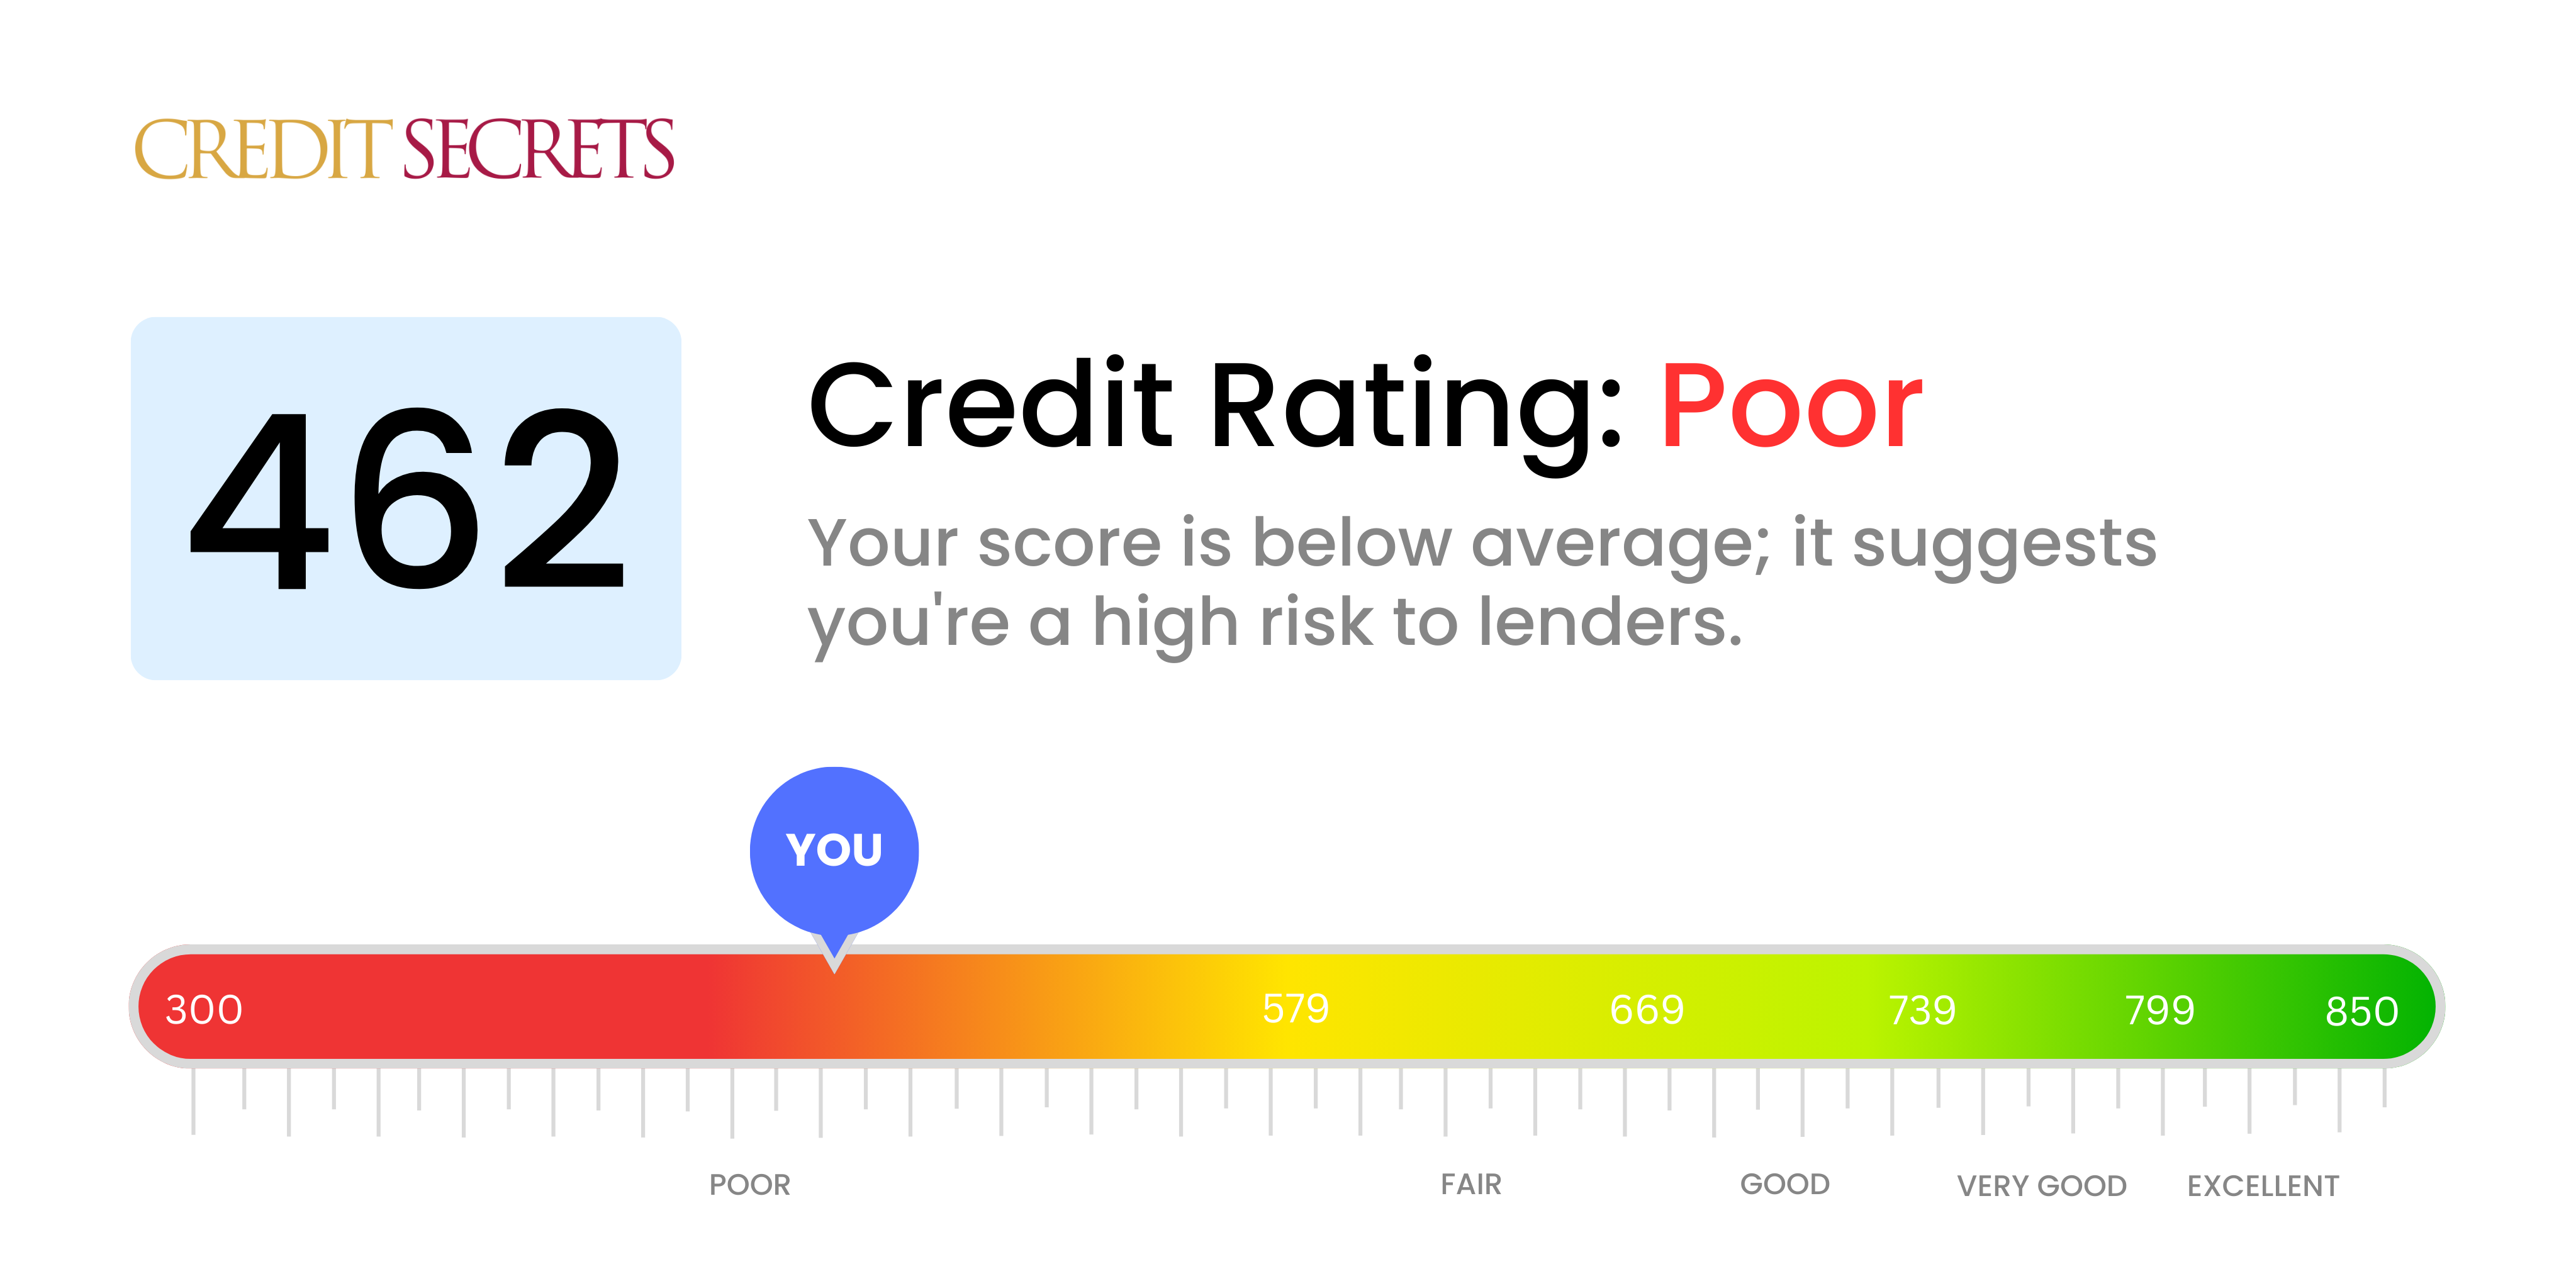 Is 462 a good credit score?